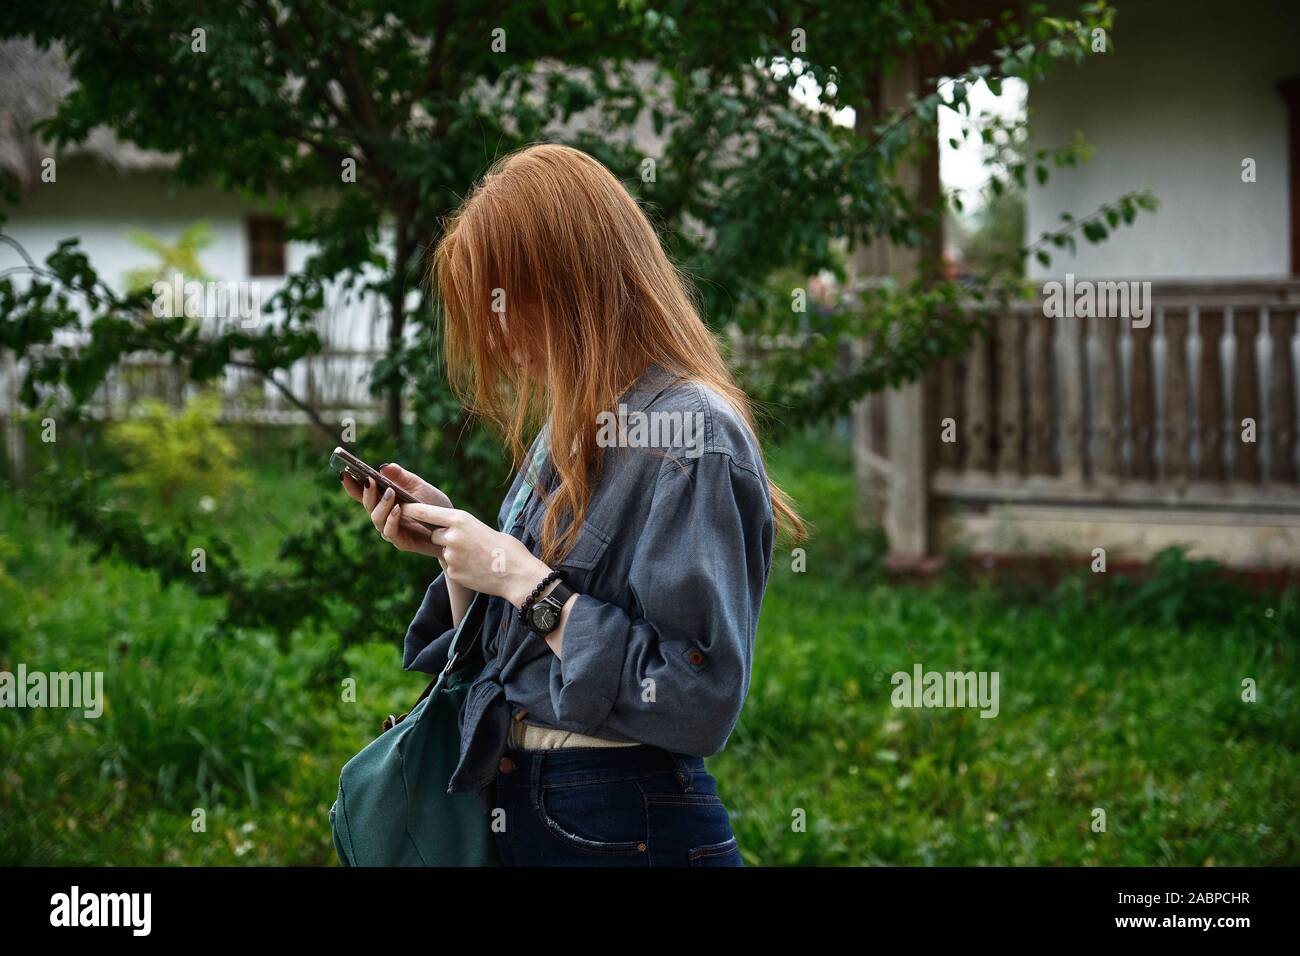 A red-haired girl in a denim shirt stands in profile with head bowed and looks at the phone against the backdrop of a green yard Stock Photo